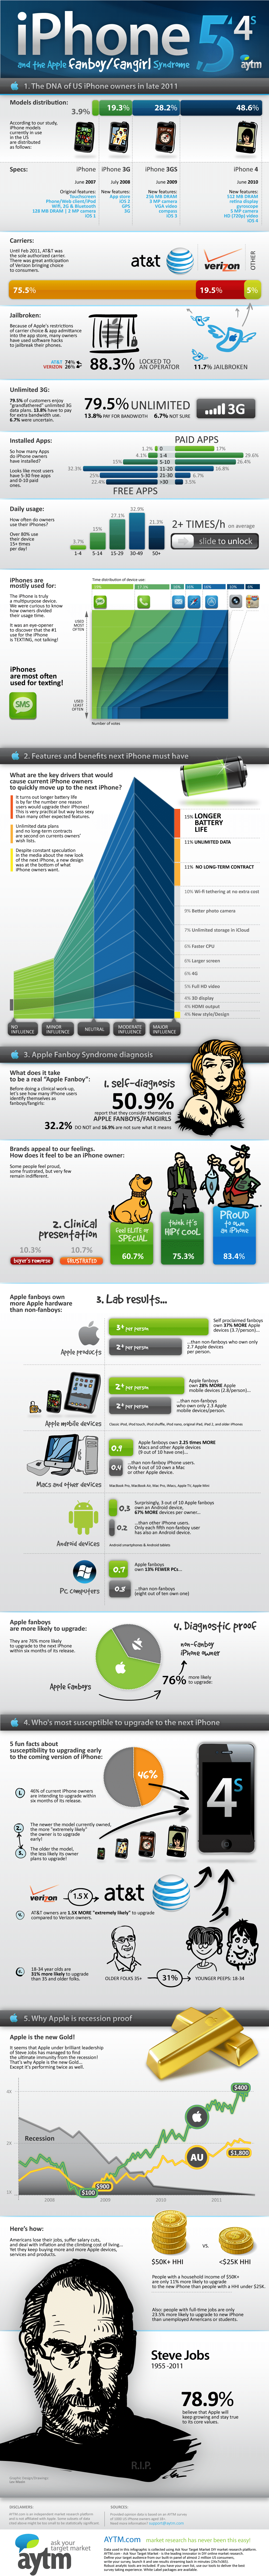 The Full iPhone Fanboy Low Down [Infographic]